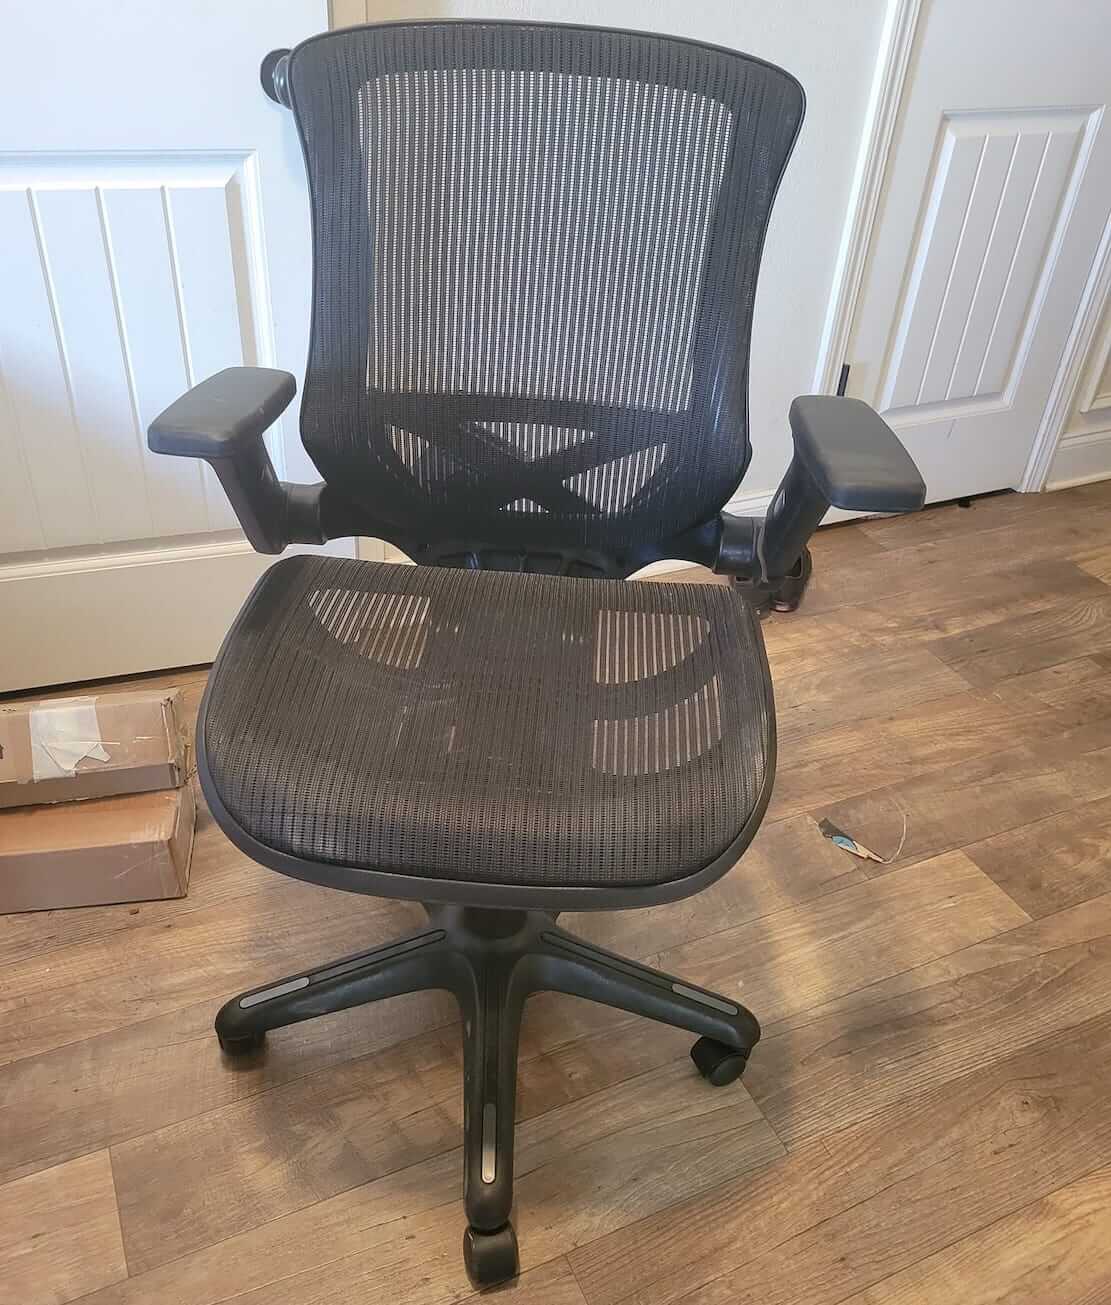 Bayside mesh chair review